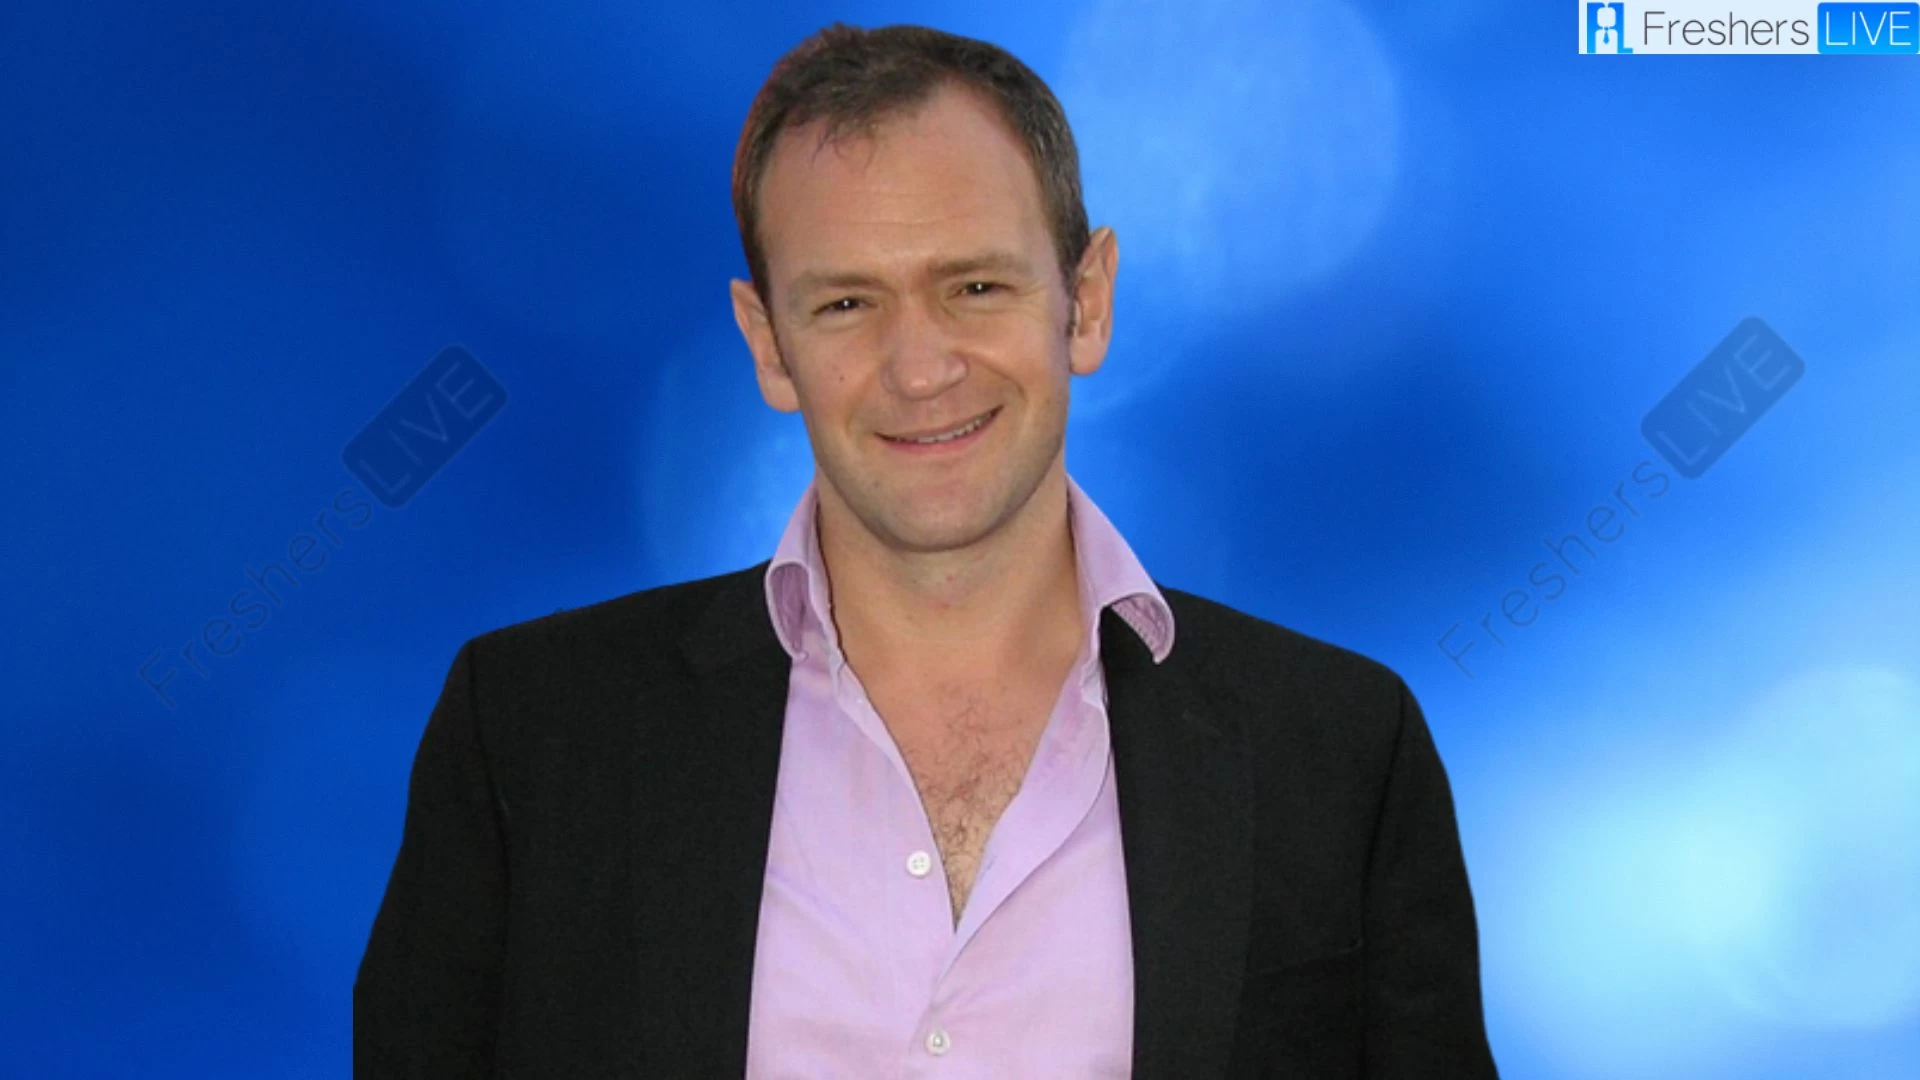 Alexander Armstrong Religion What Religion is Alexander Armstrong? Is Alexander Armstrong a Christian?